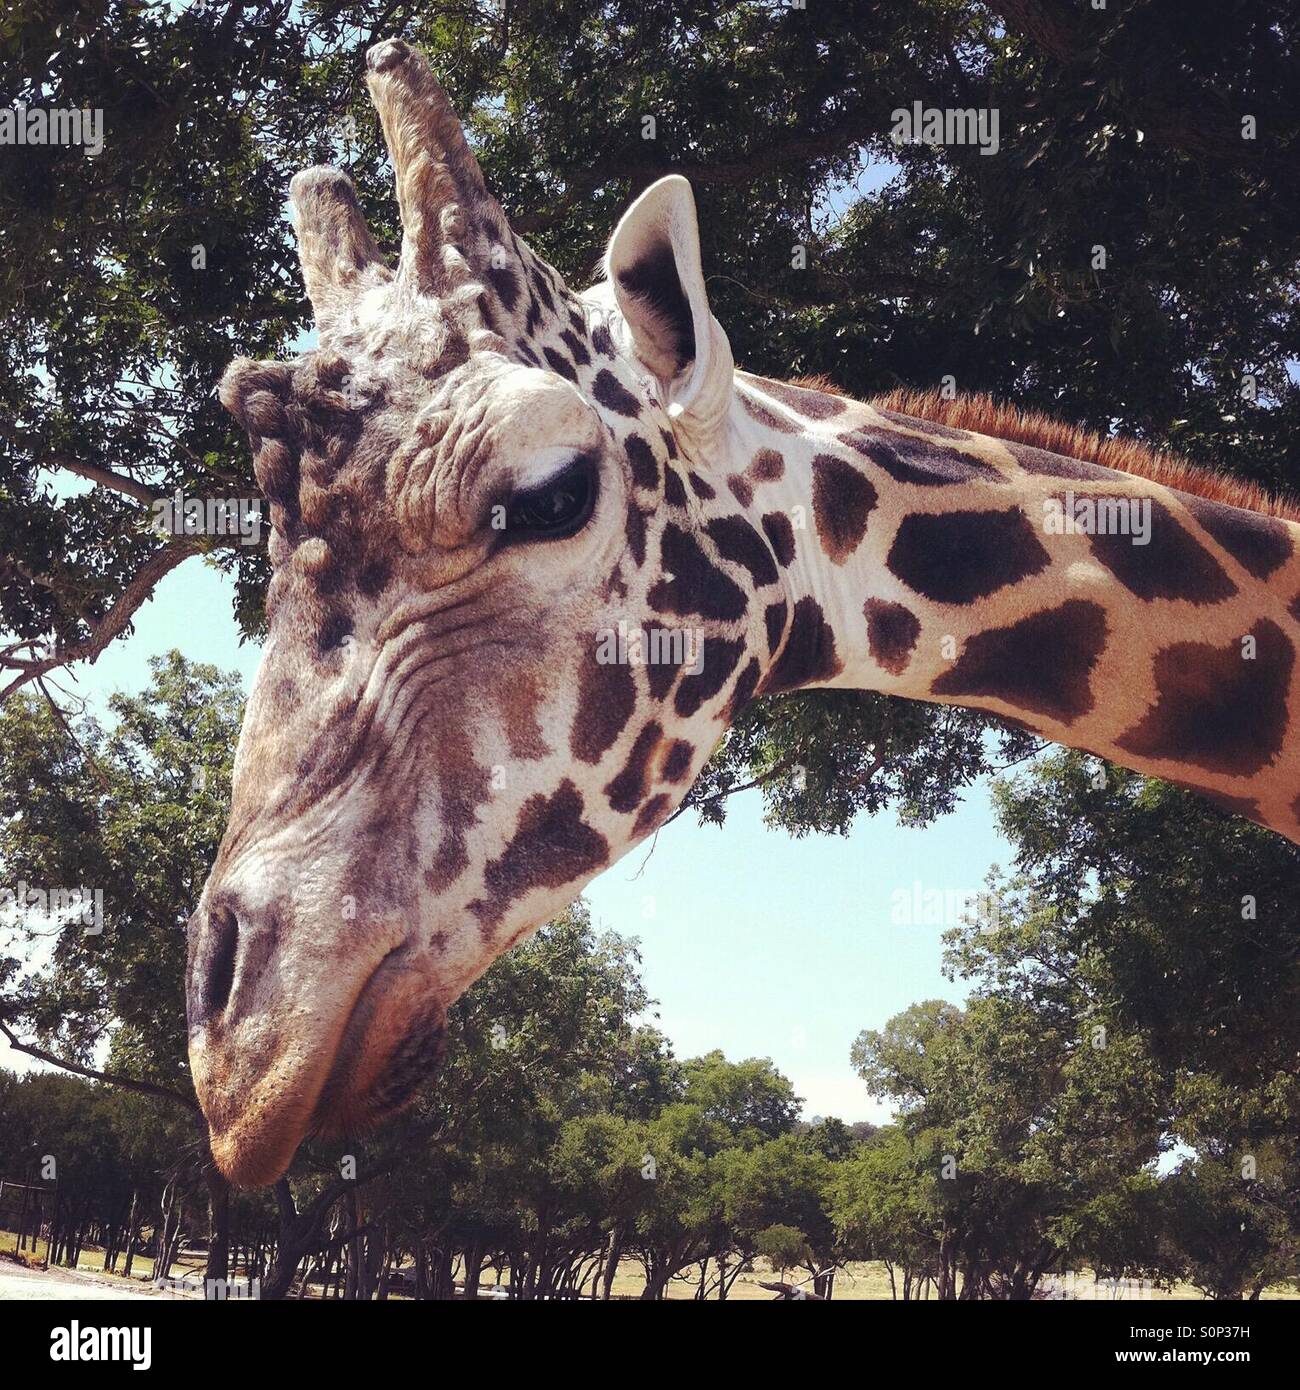 Up close & personal with a giraffe Stock Photo